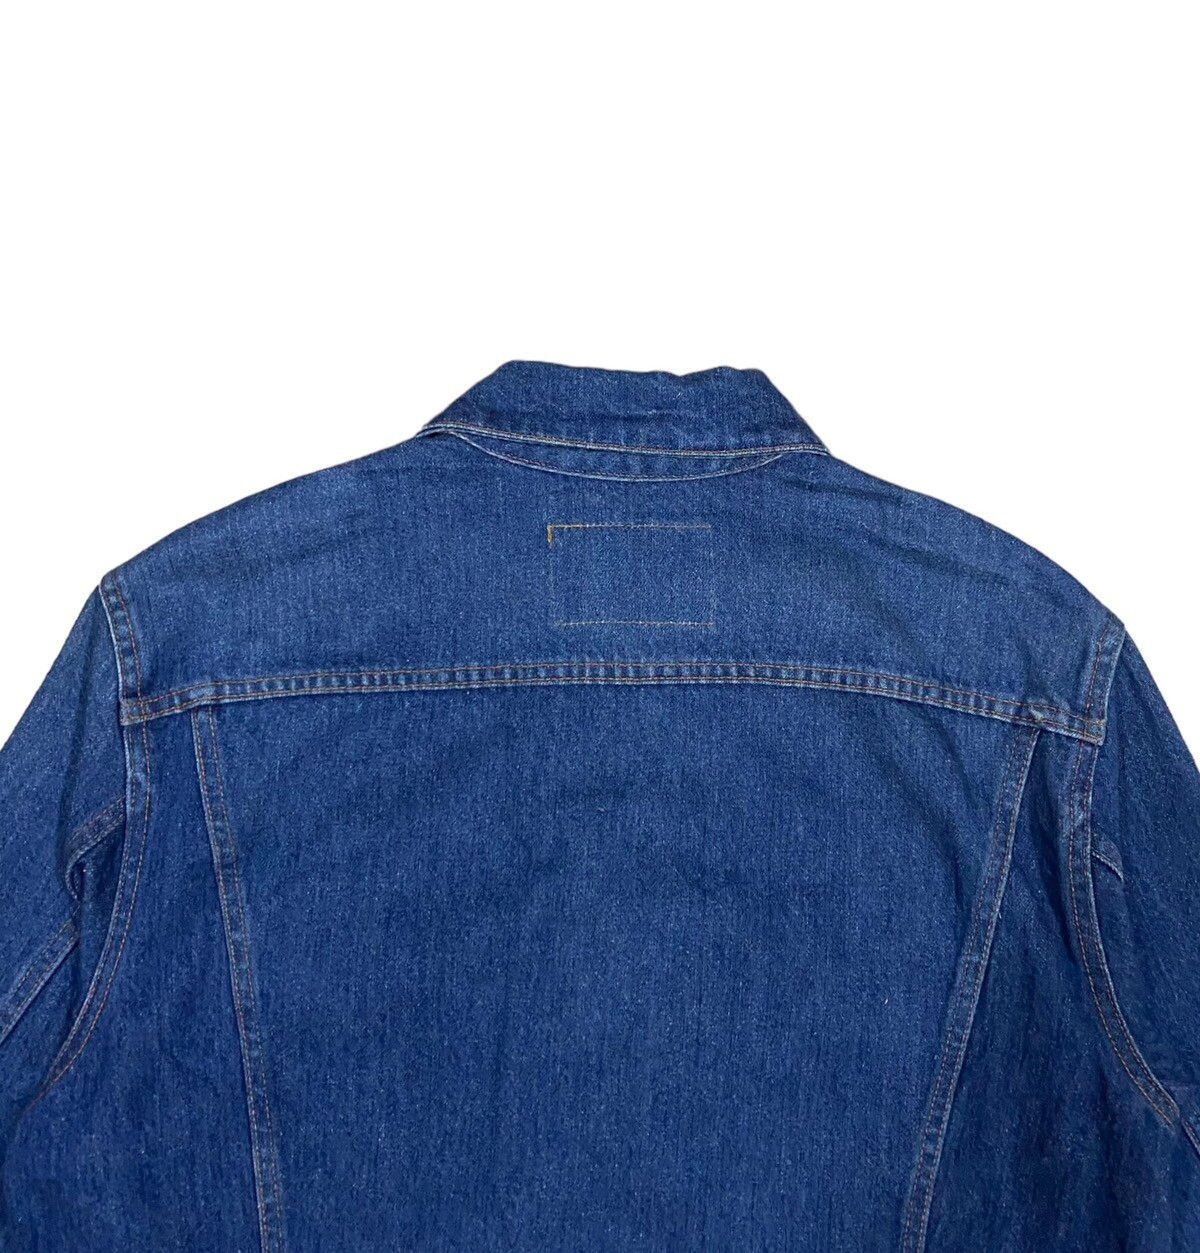 Valentino Jeans Made In Italy Type-3 Denim Jacket - 10